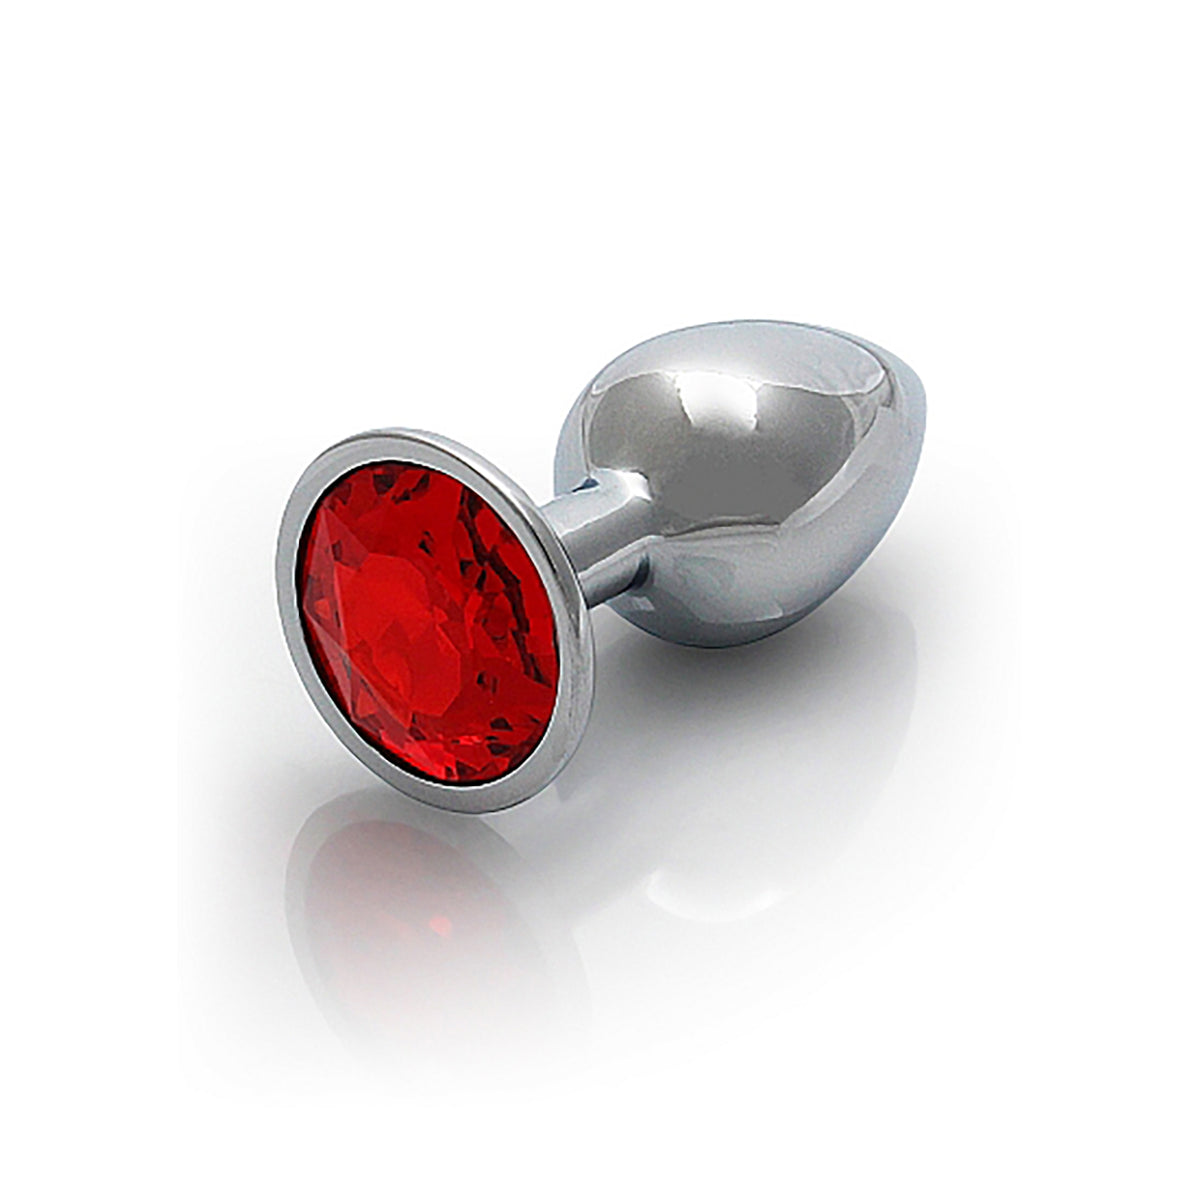 Shots Ouch! Round Gem Butt Plug Small - Silver/Ruby Red Small